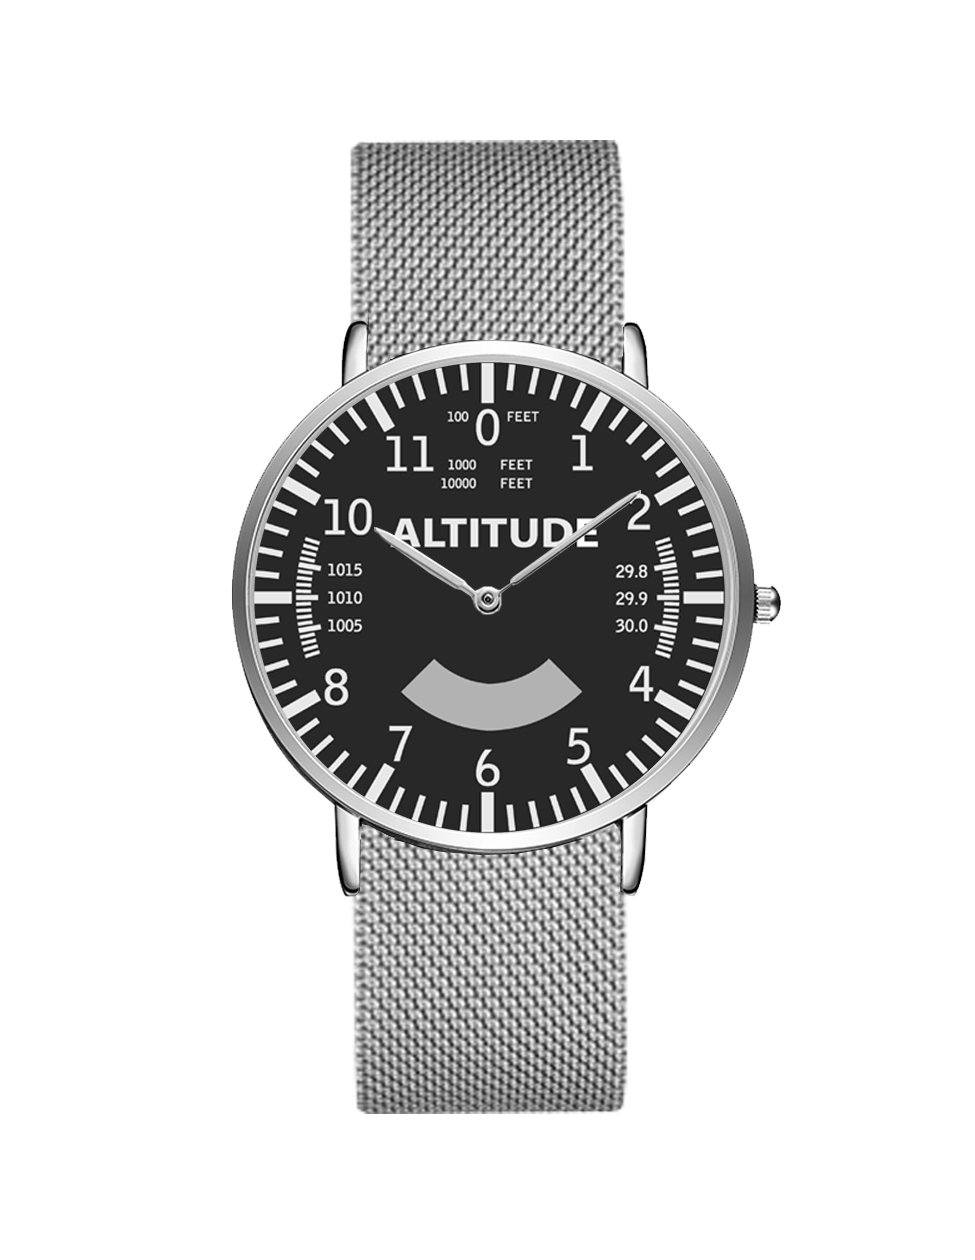 Airplane Instrument Series (Altitude) Stainless Steel Strap Watches Pilot Eyes Store Silver & Silver Stainless Steel Strap 